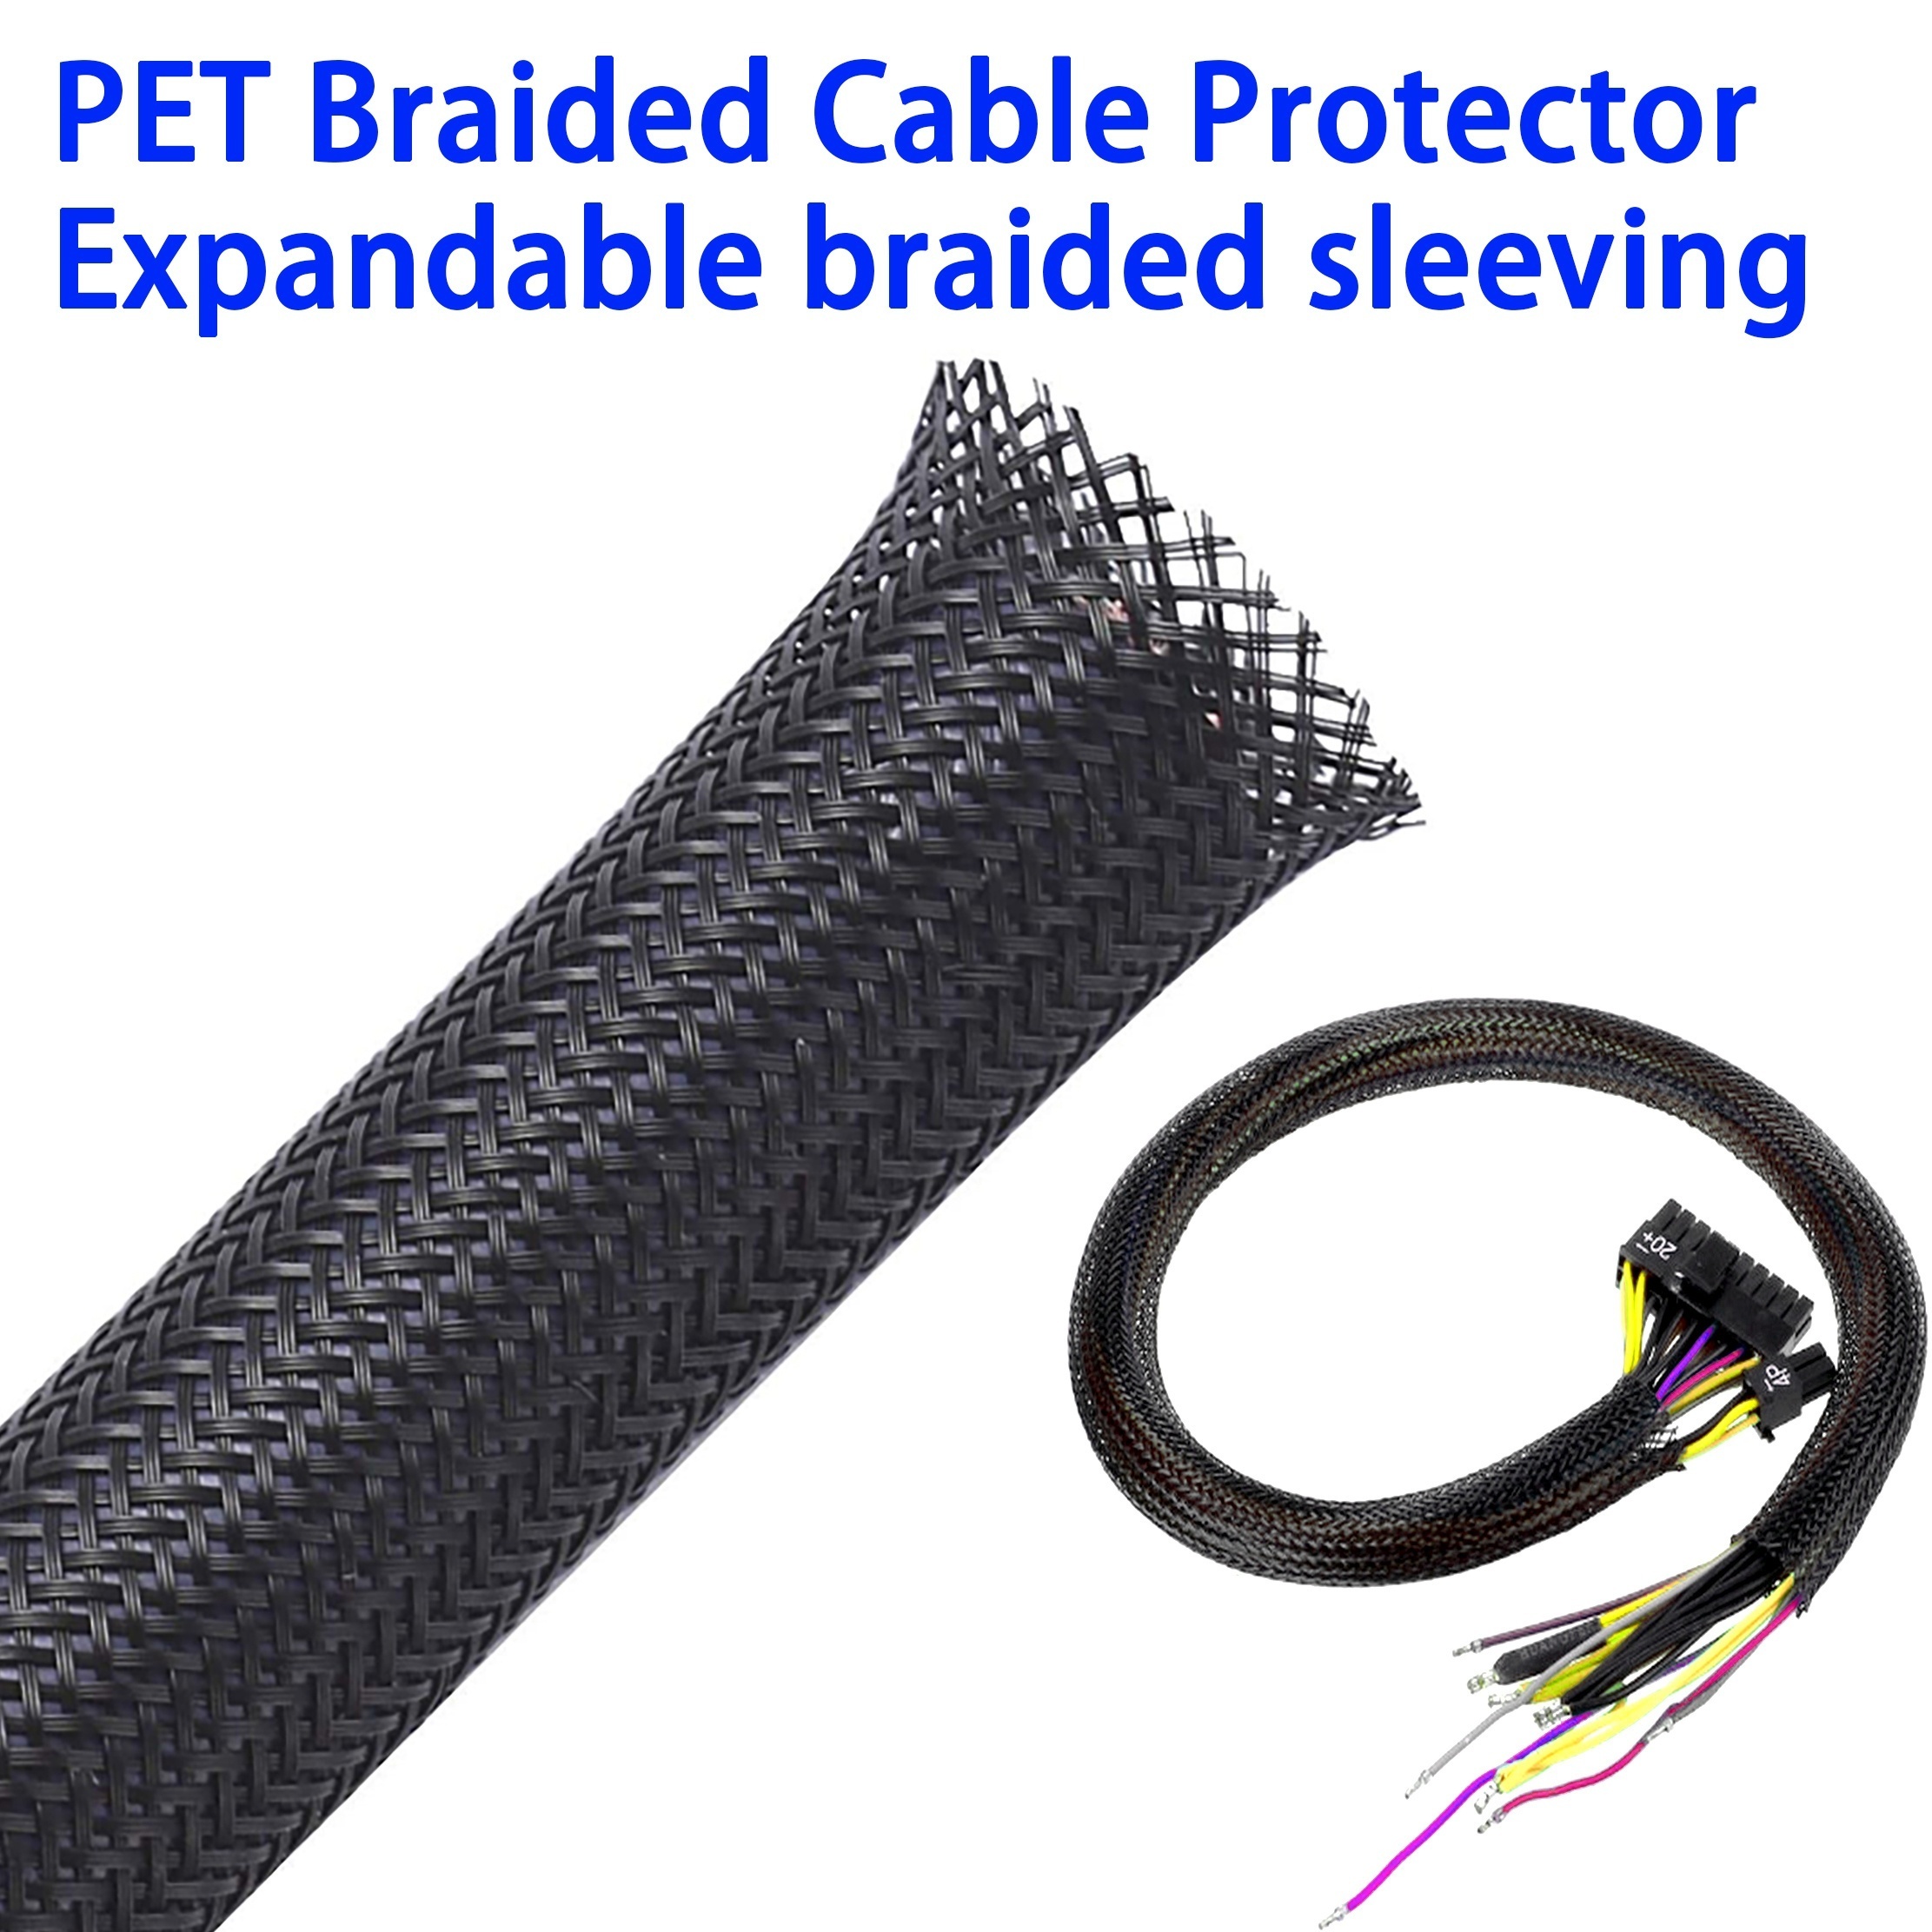 Braided PET Expandable Wire Loom, Braided Wire Sleeving Mesh Cable  Management with 8 Heat Shrinkable Tubes, Braided Cable Sleeve for Home  Office Cord